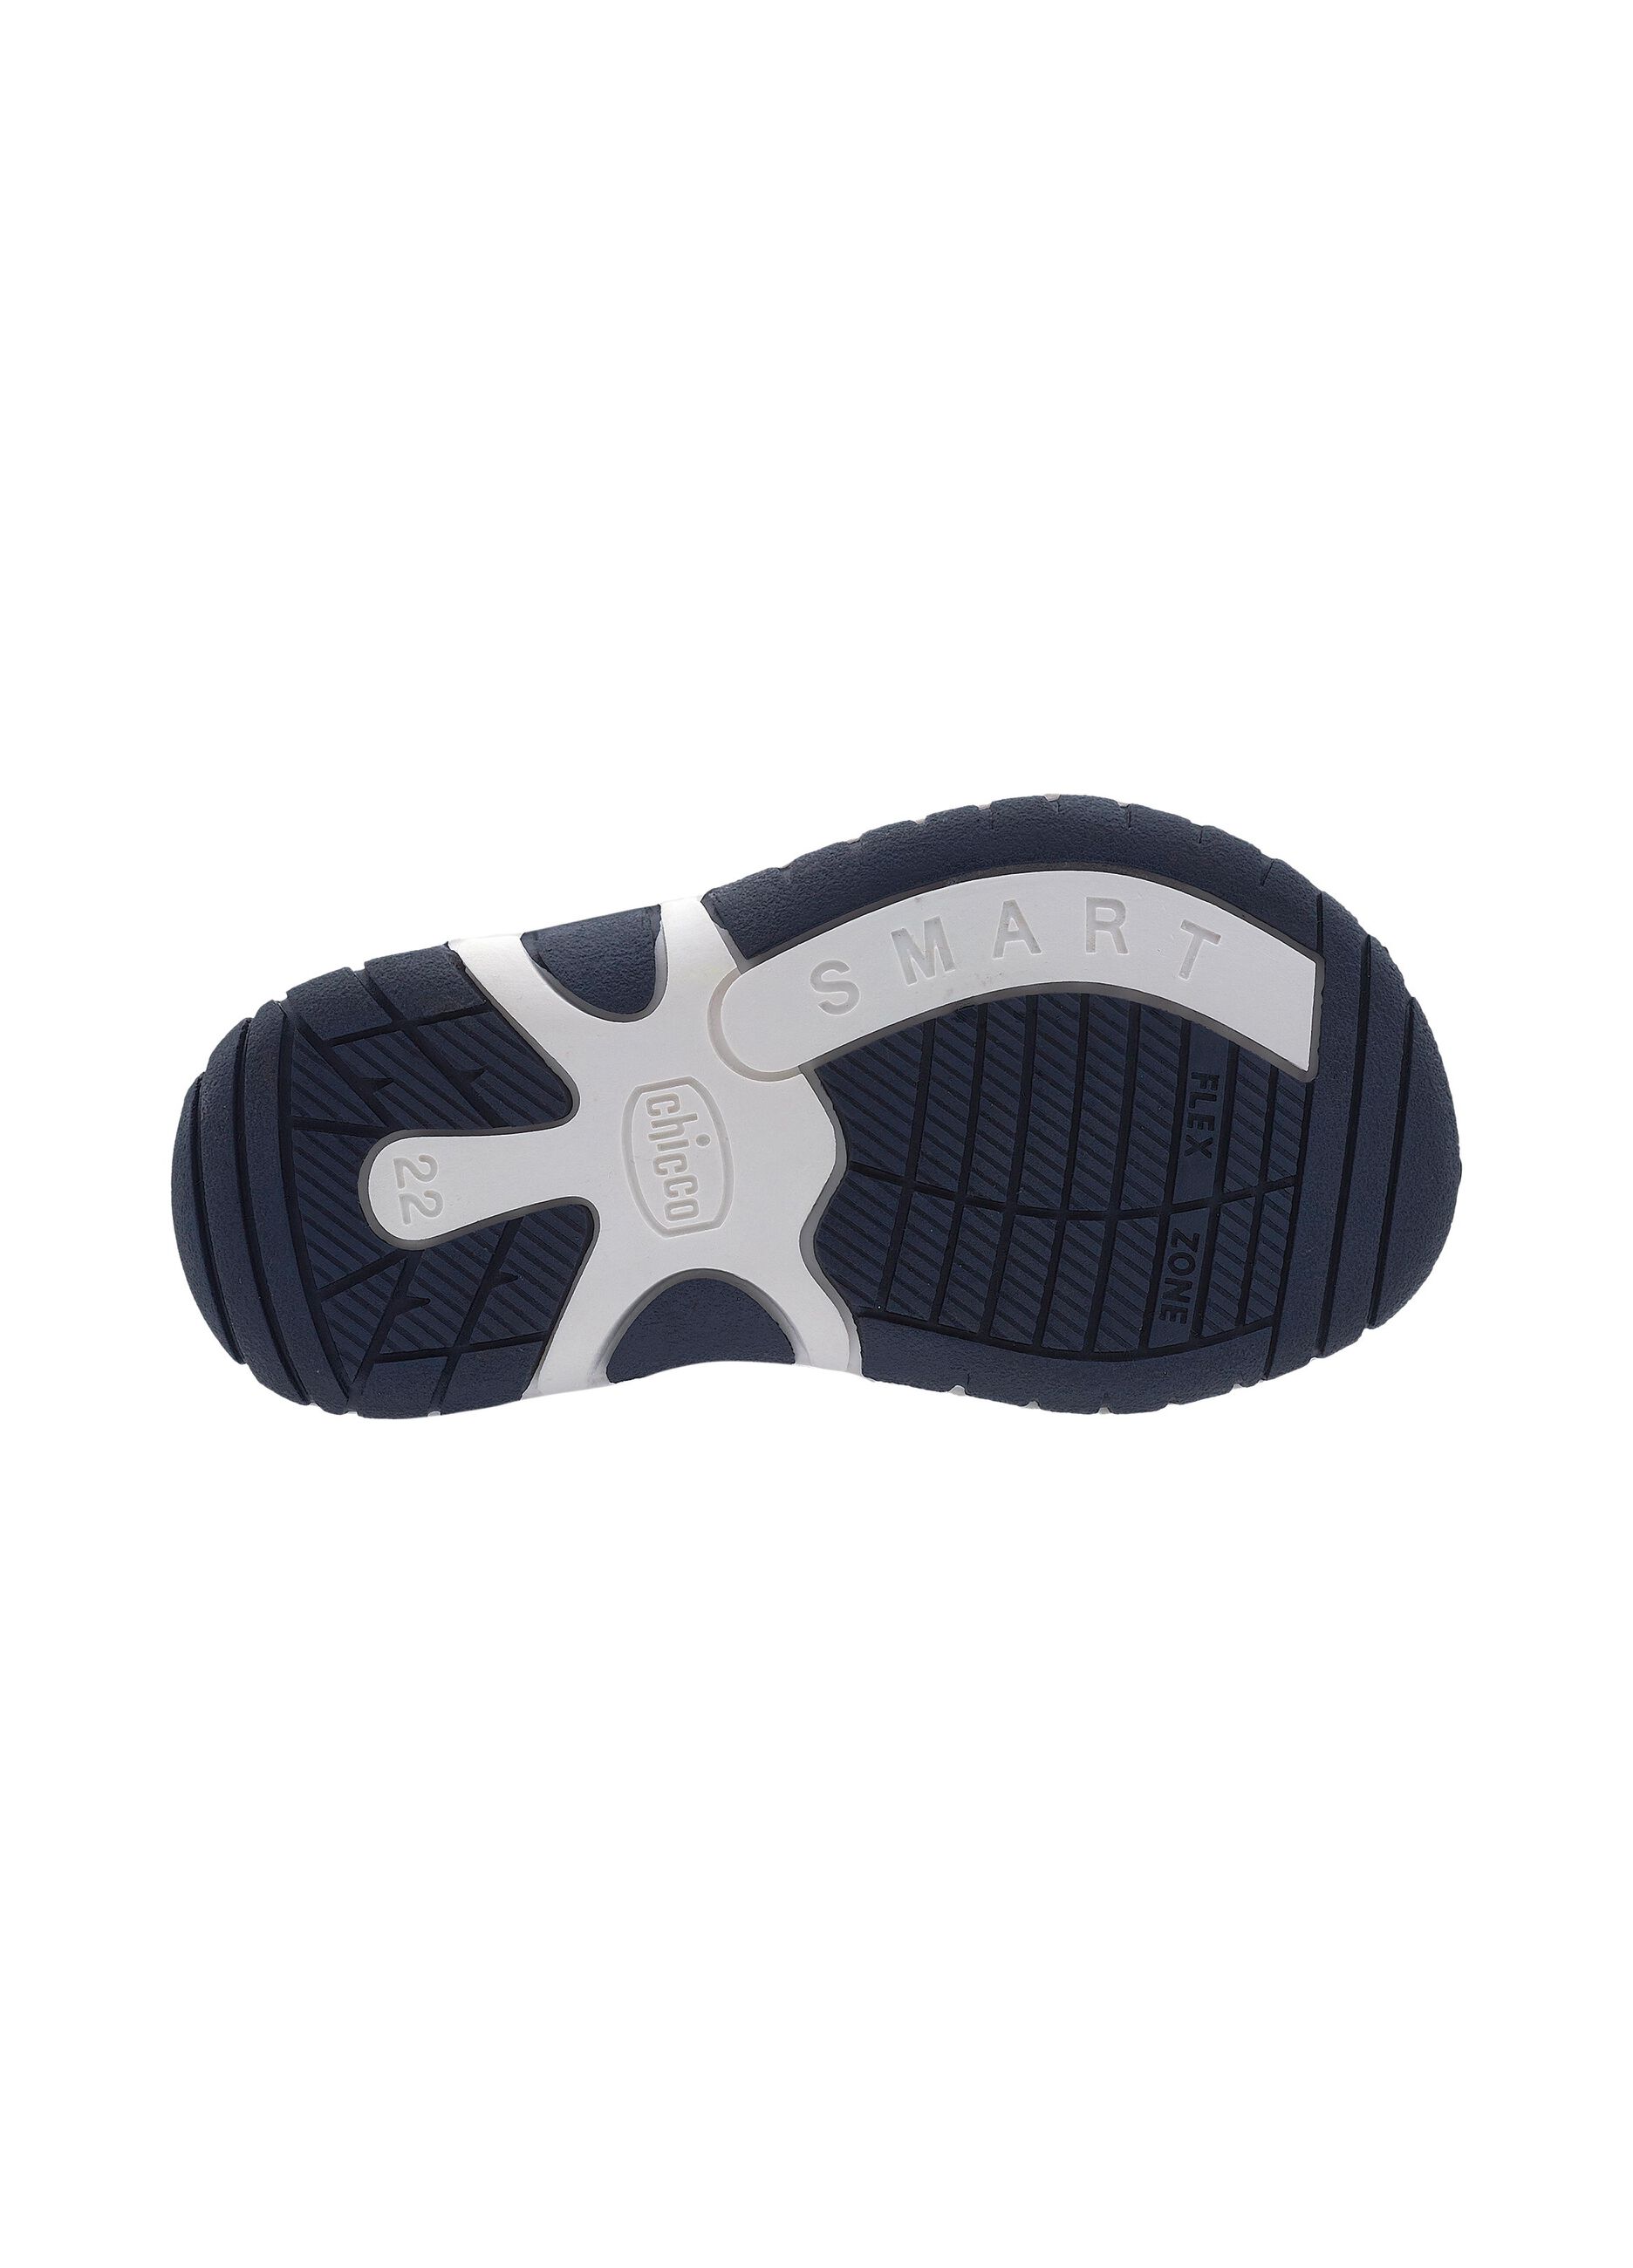 Forrest sandals with double Velcro strap